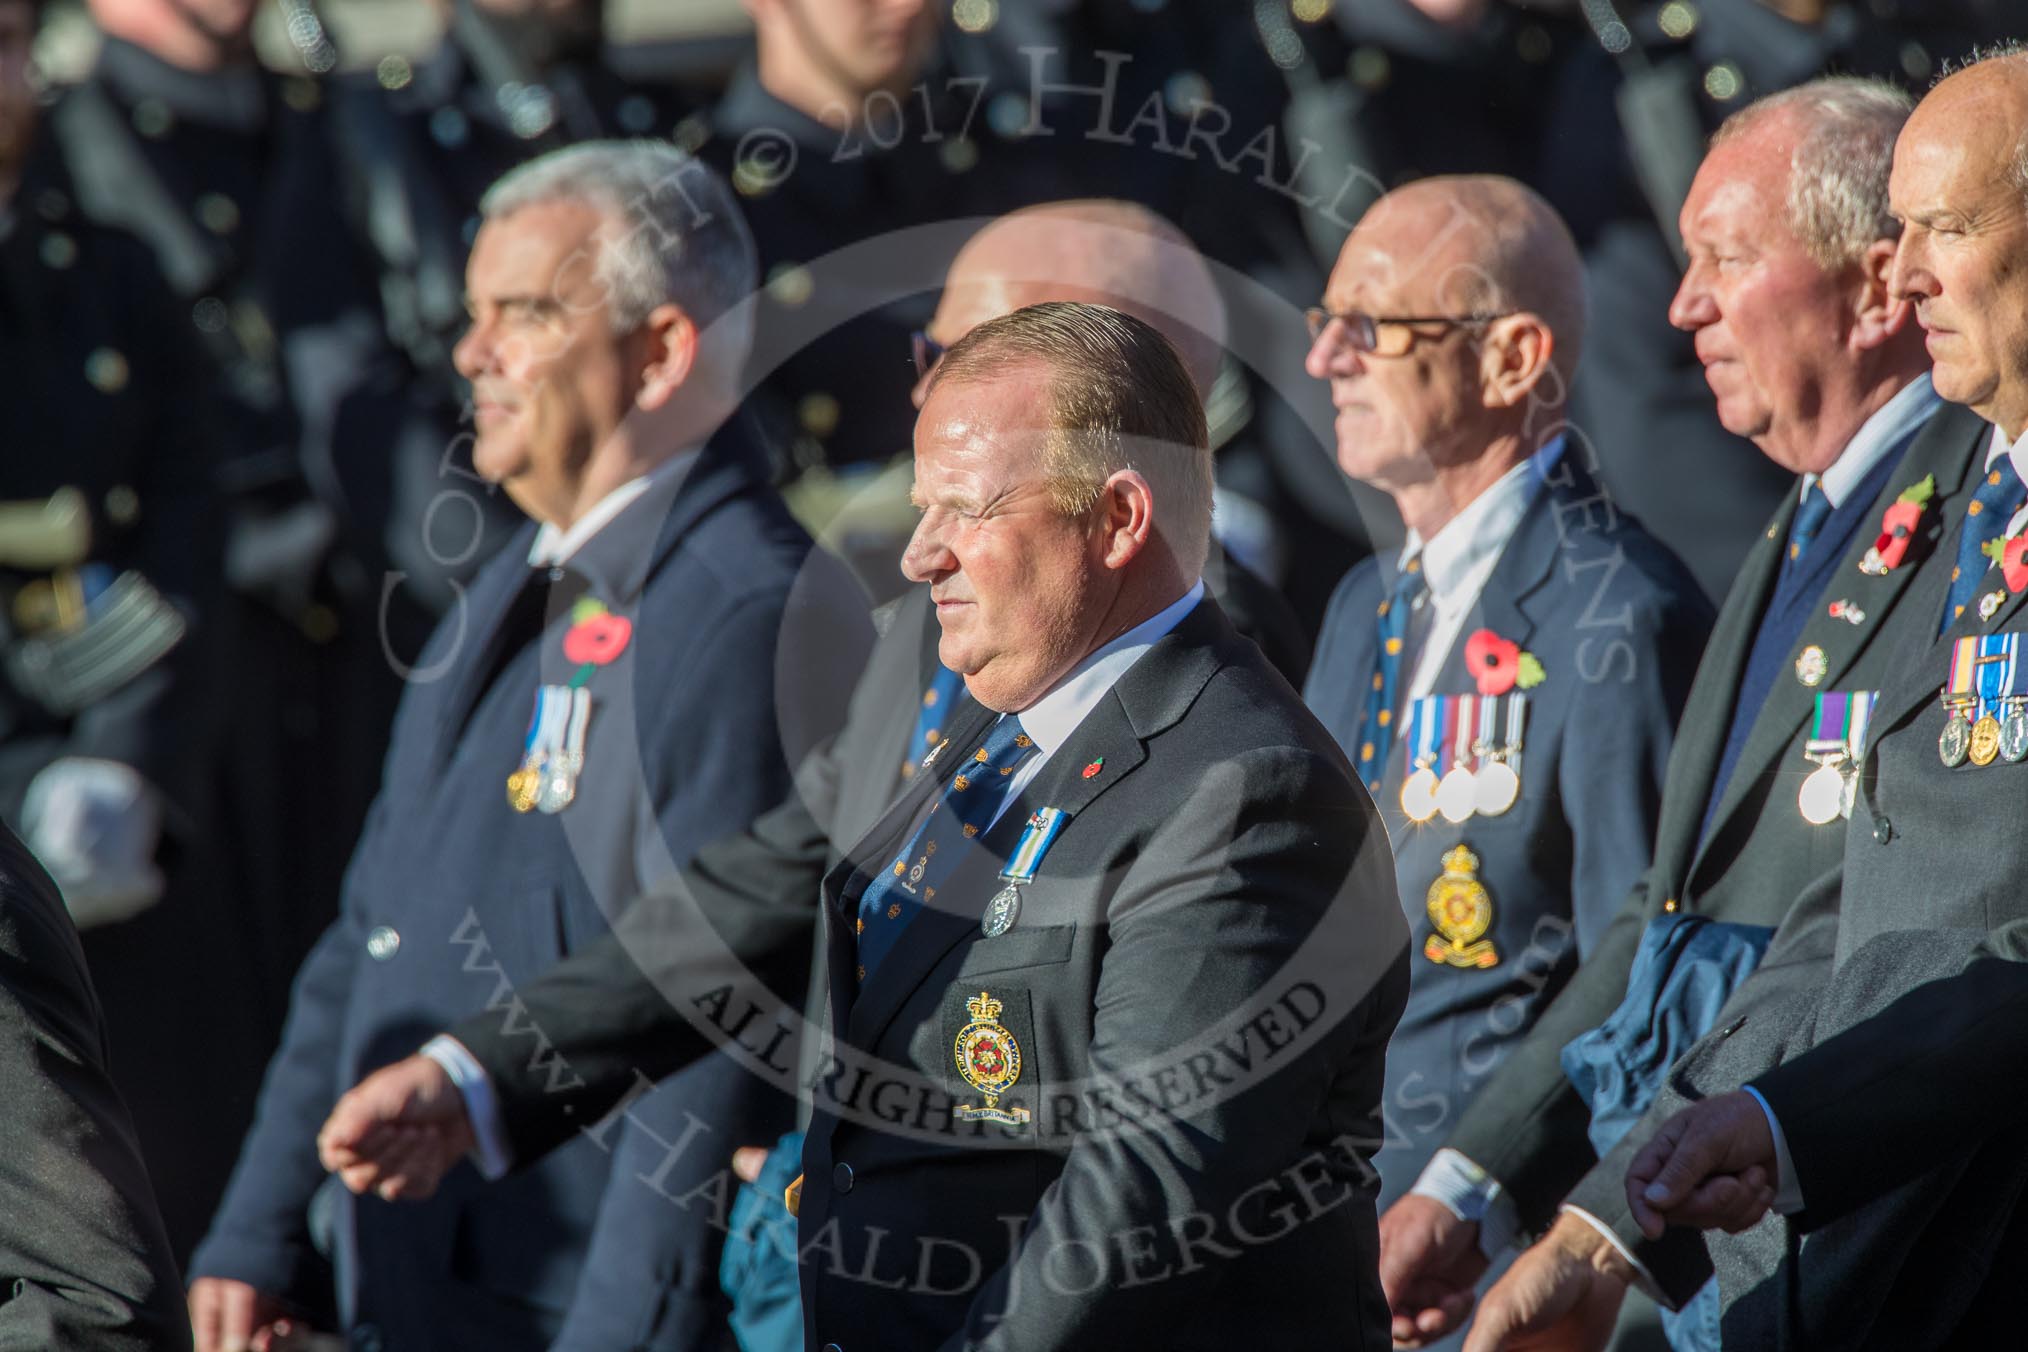 Association  OF Royal Yachtsmen (Group E39, 32 members) during the Royal British Legion March Past on Remembrance Sunday at the Cenotaph, Whitehall, Westminster, London, 11 November 2018, 11:46.